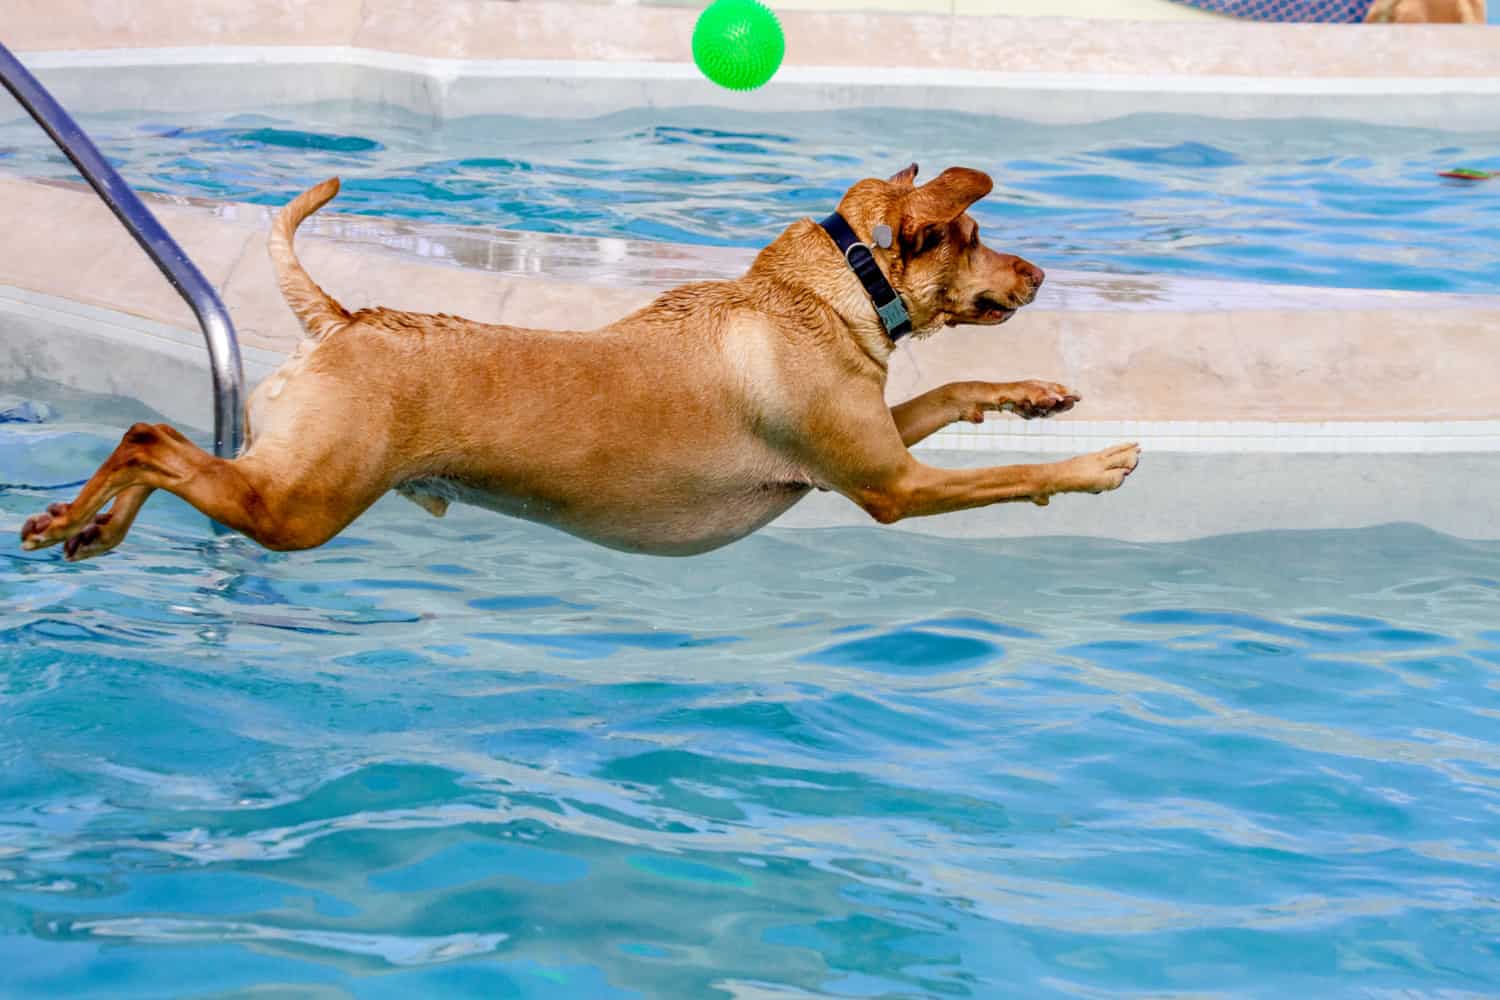 The yellow Labrador Retriever jumps into the pool to pick up a ball